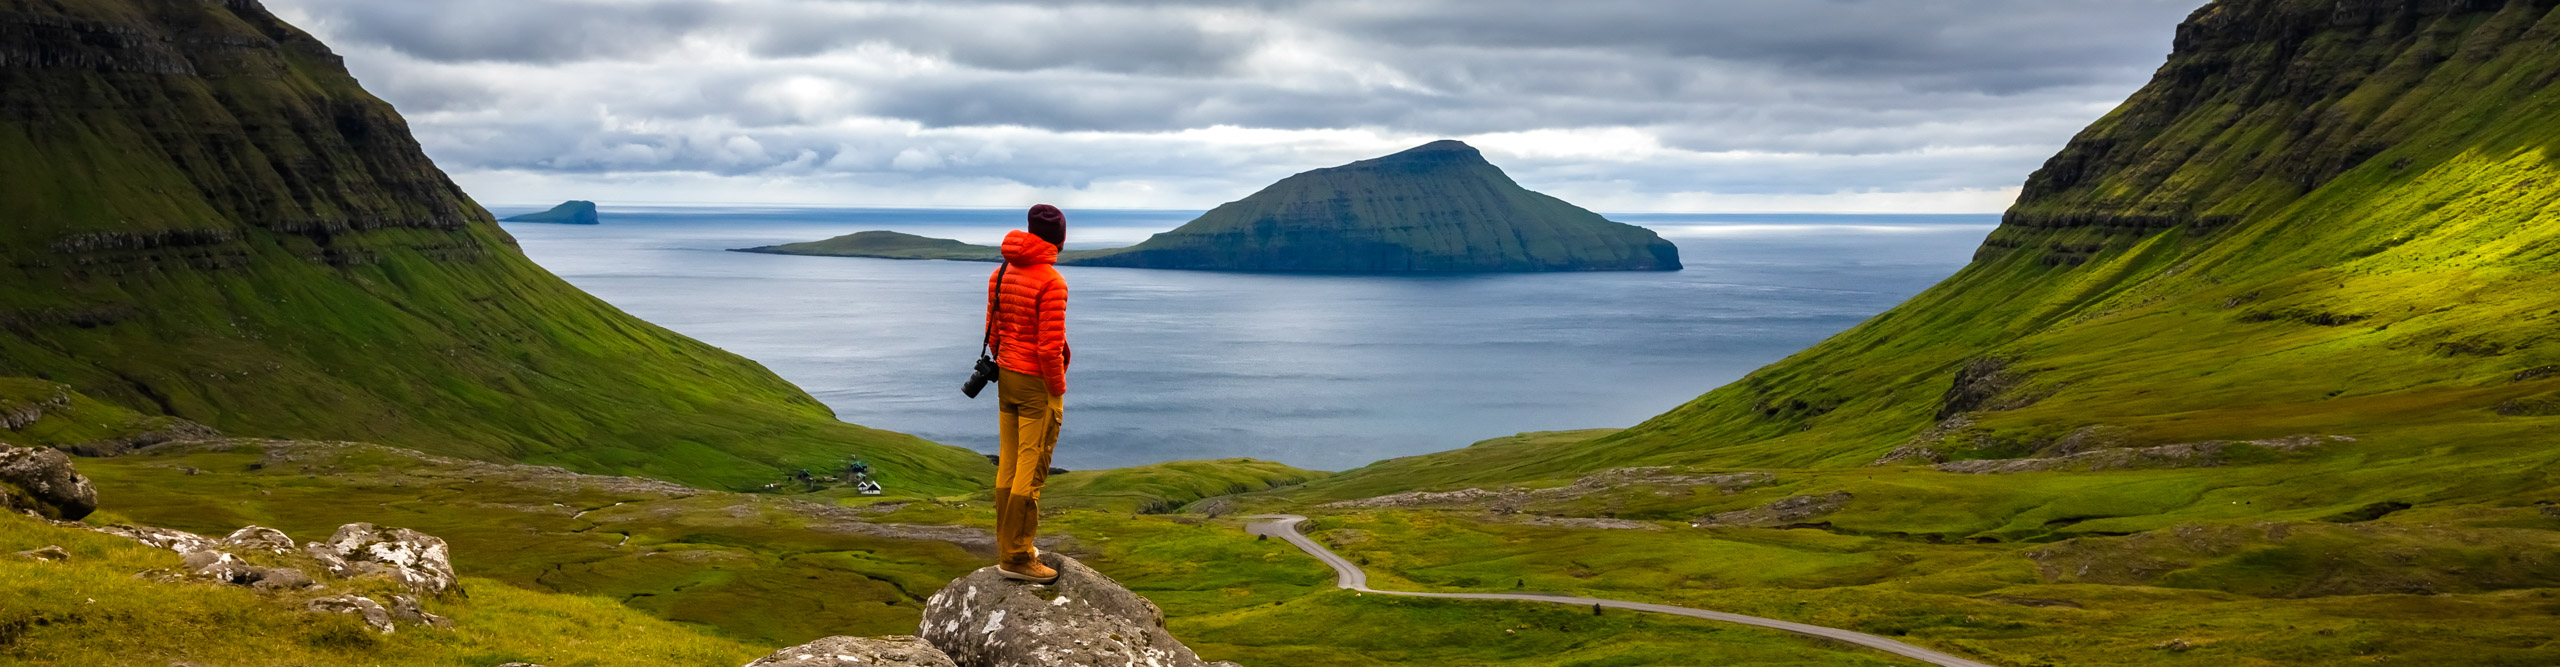 Man in front of a mountain landscape in the Faroe Islands, Denmark, on a cloudy day 